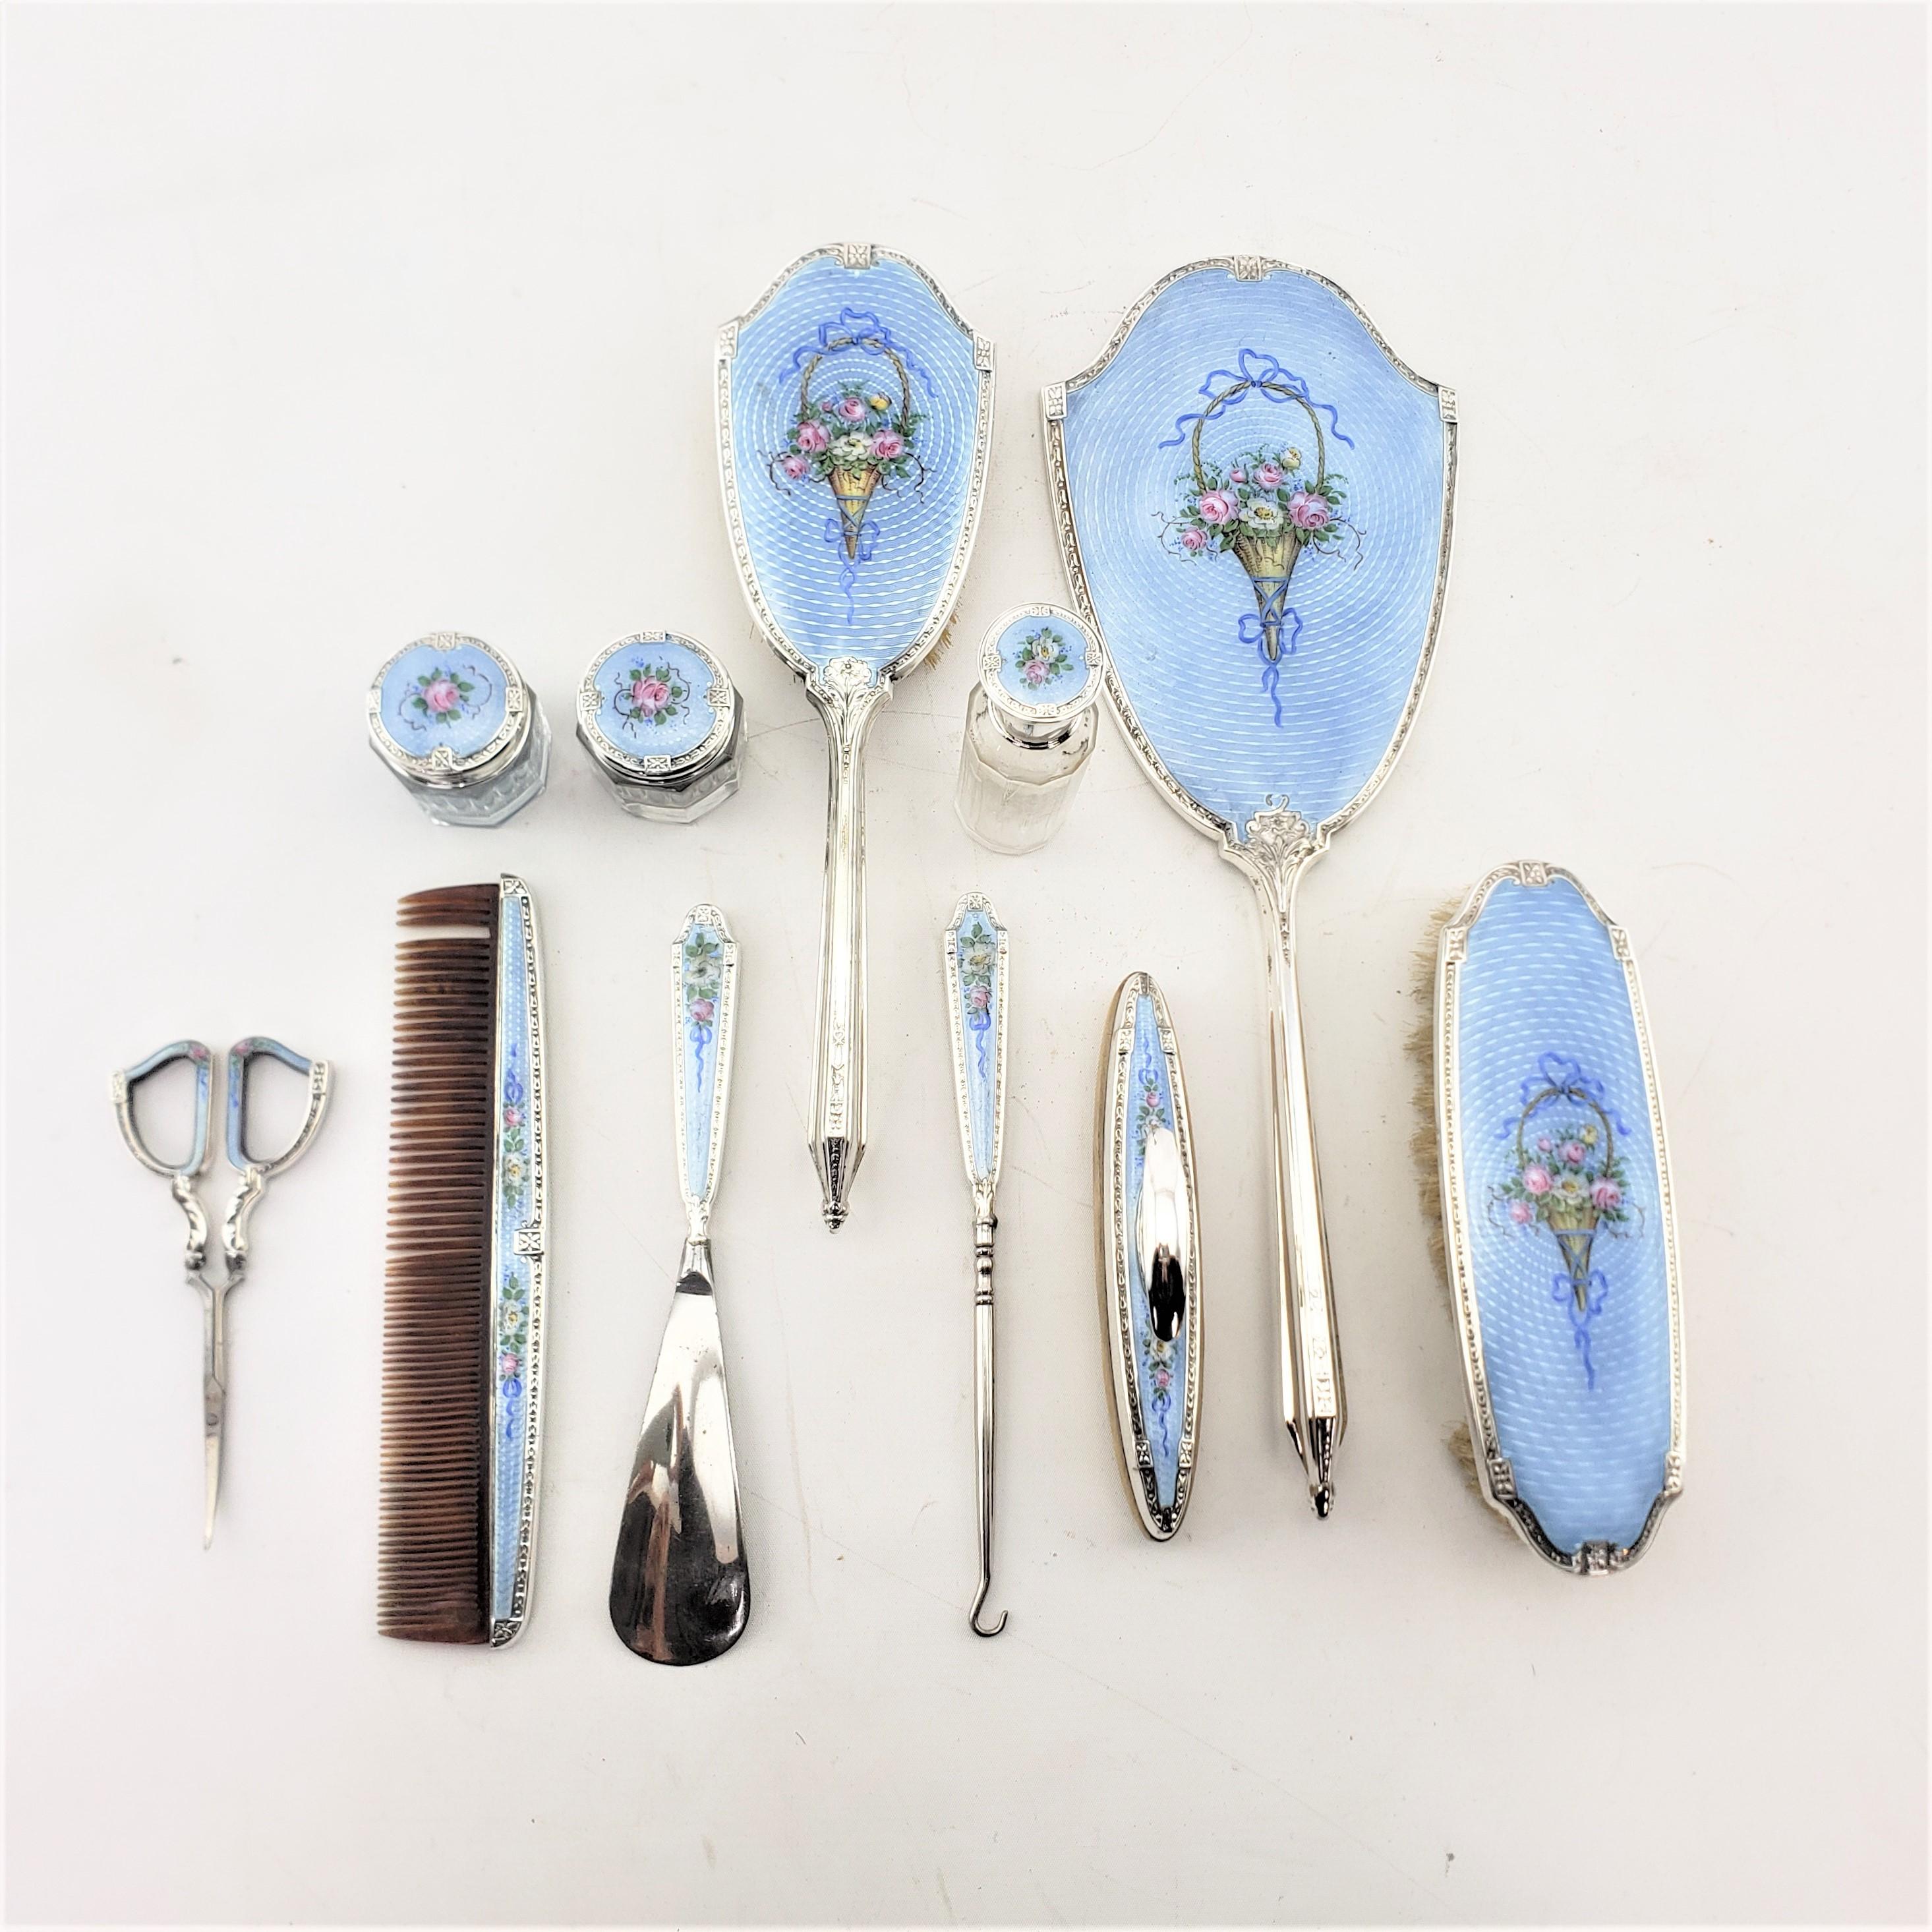 This large antique ladies dresser or vanity set is hallmarked by an unknown maker, and presumed to have originated from the United States and date to approximately 1920 and done in a period Art Deco style. The set is composed of eleven pieces, each